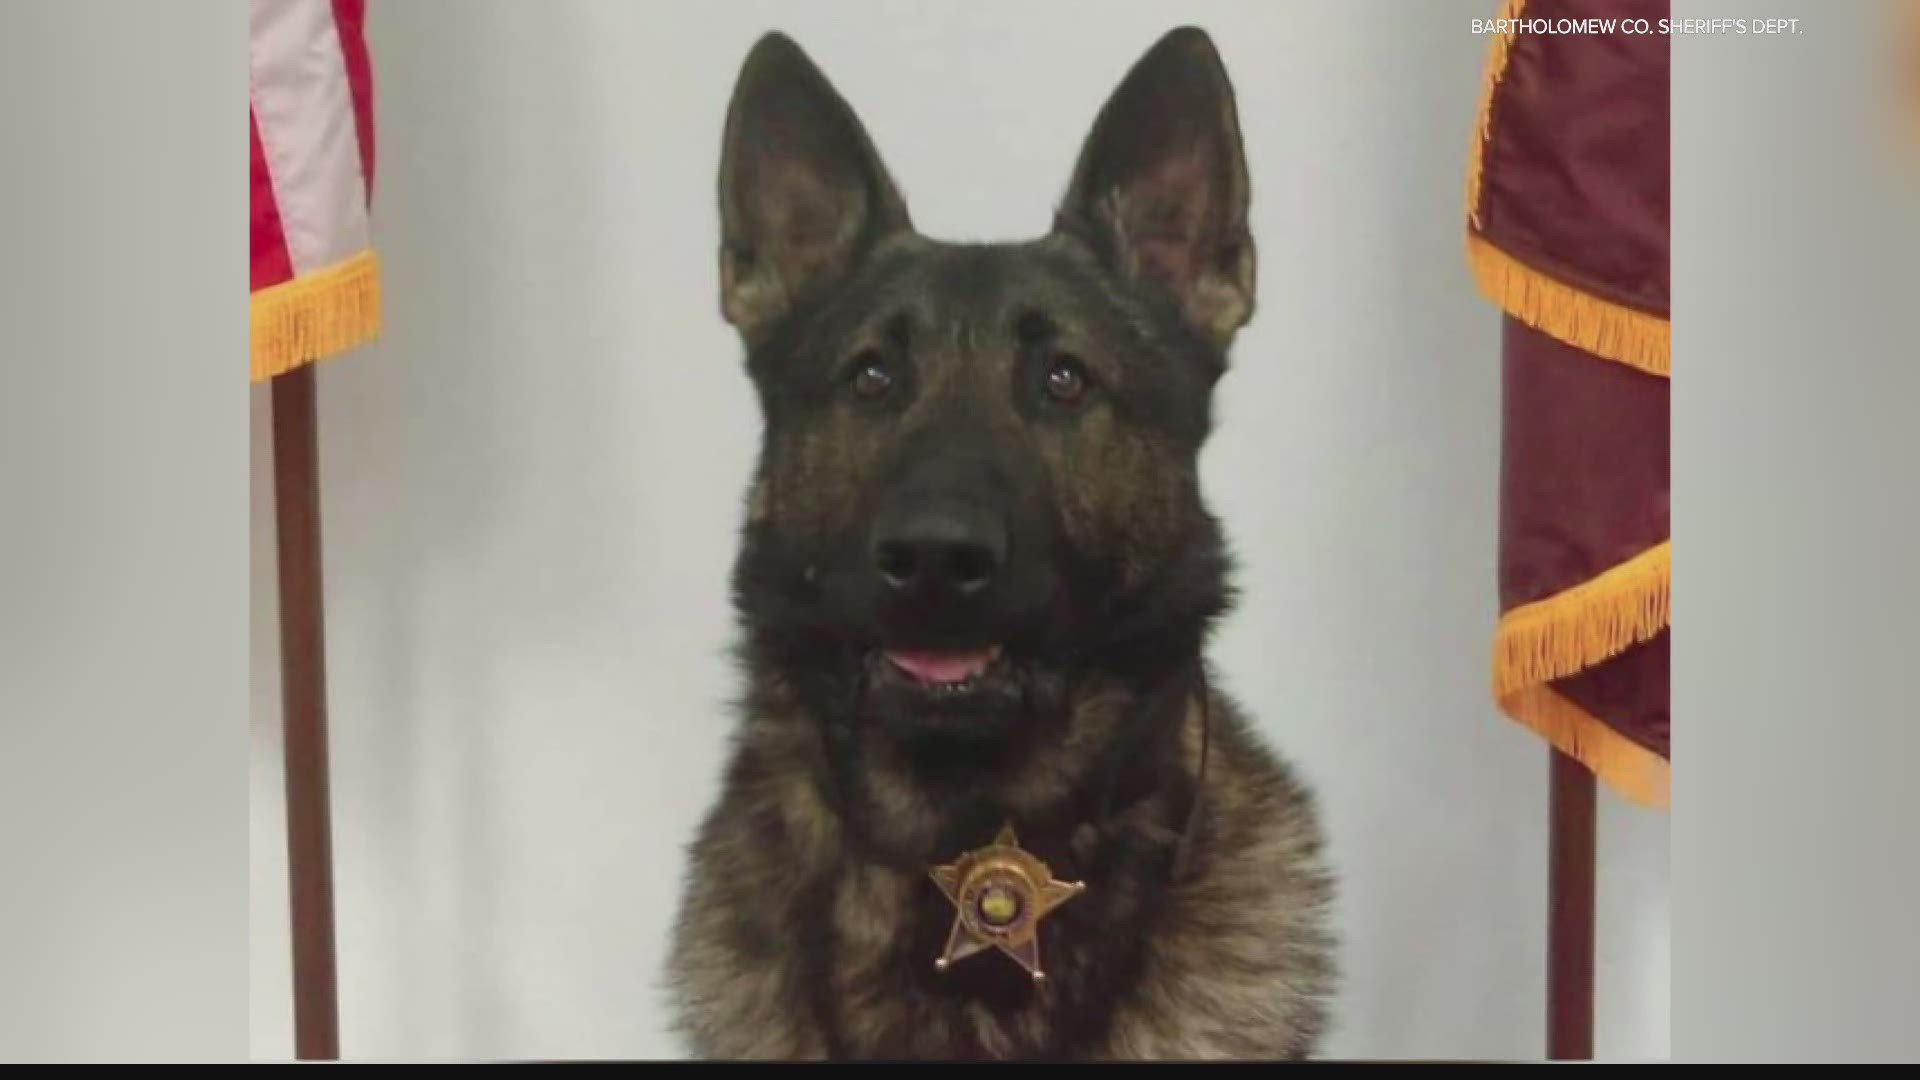 Diesel's handler's police vehicle will be parked in front of the sheriff's office as a memorial to the K-9 deputy for those that wish to pay their respects.